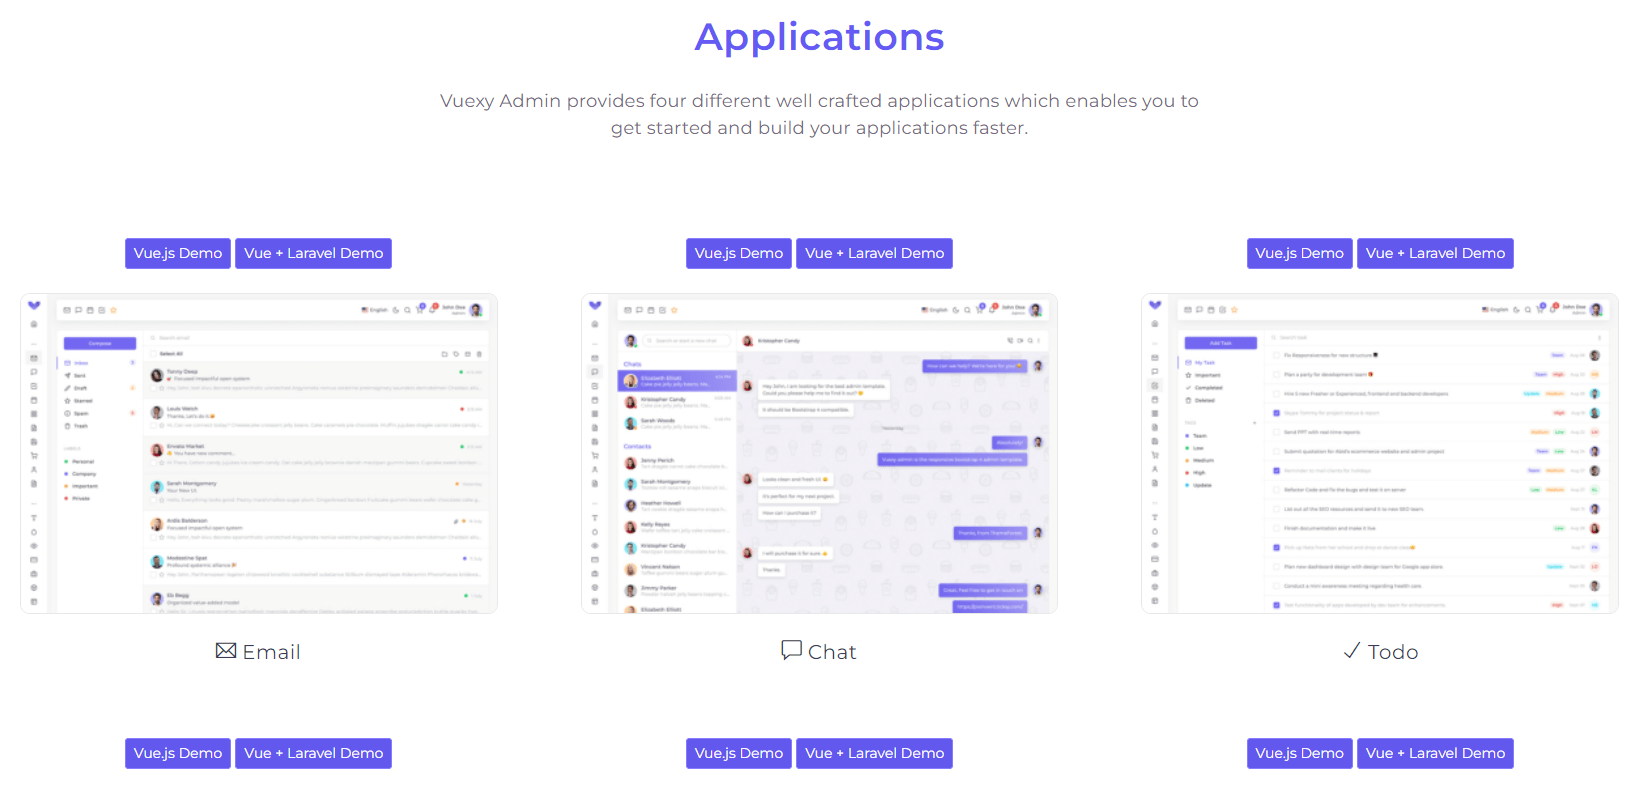 The Applications That Can be Created Using Vuexy